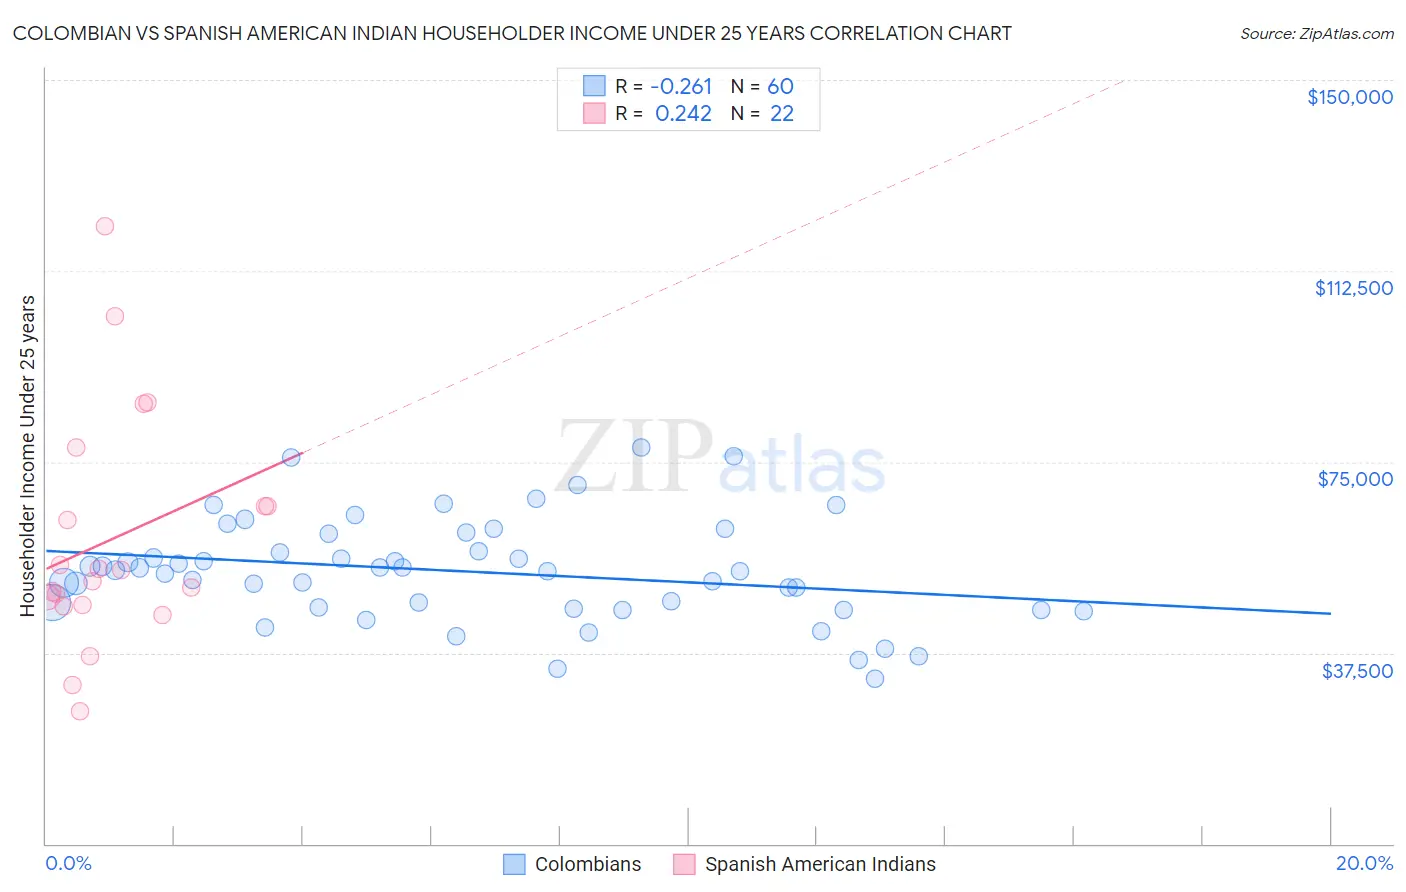 Colombian vs Spanish American Indian Householder Income Under 25 years